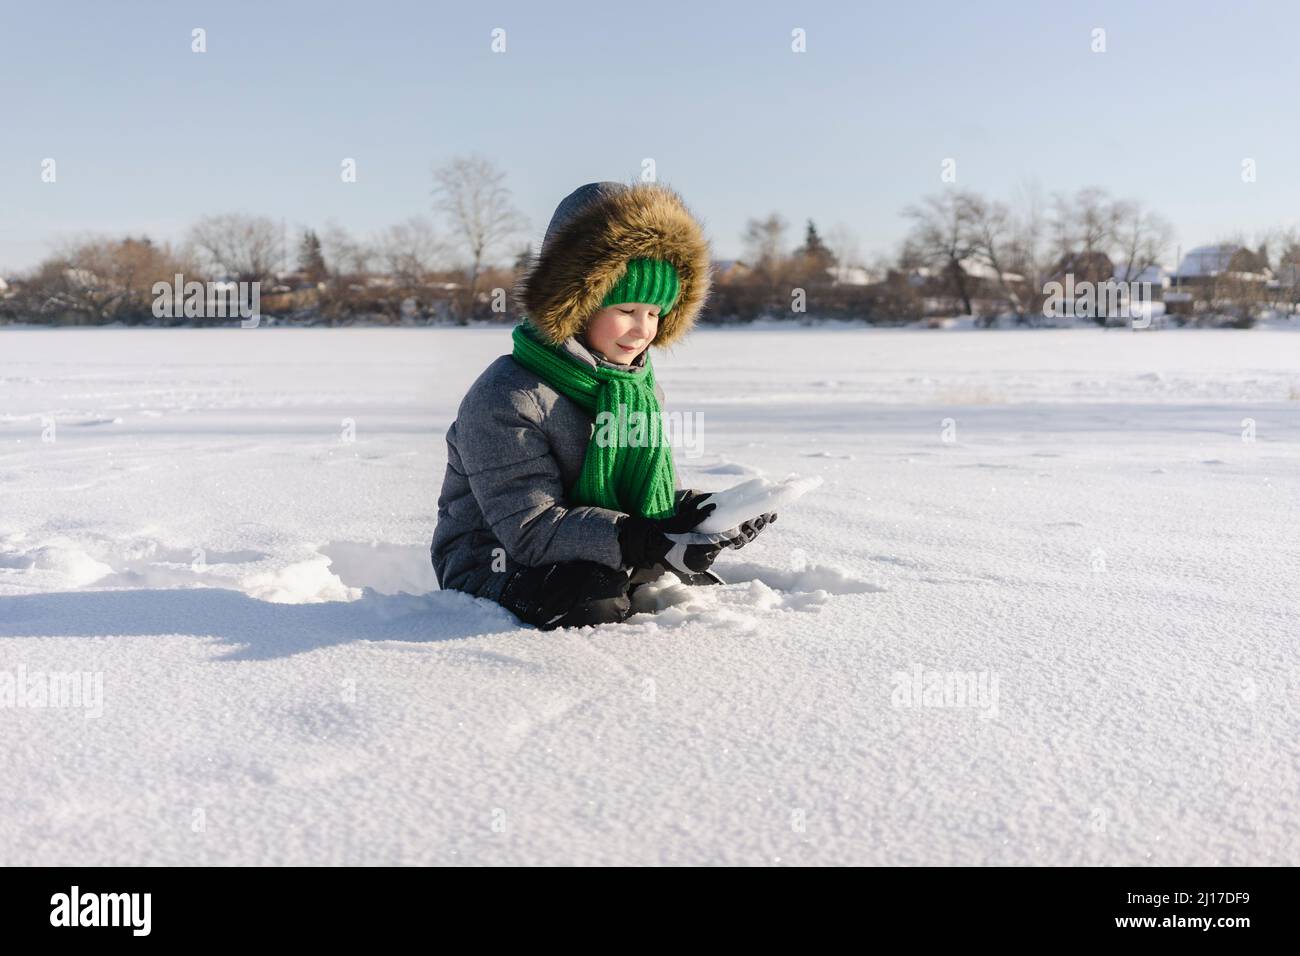 Boy with warm clothing sitting in snow Stock Photo